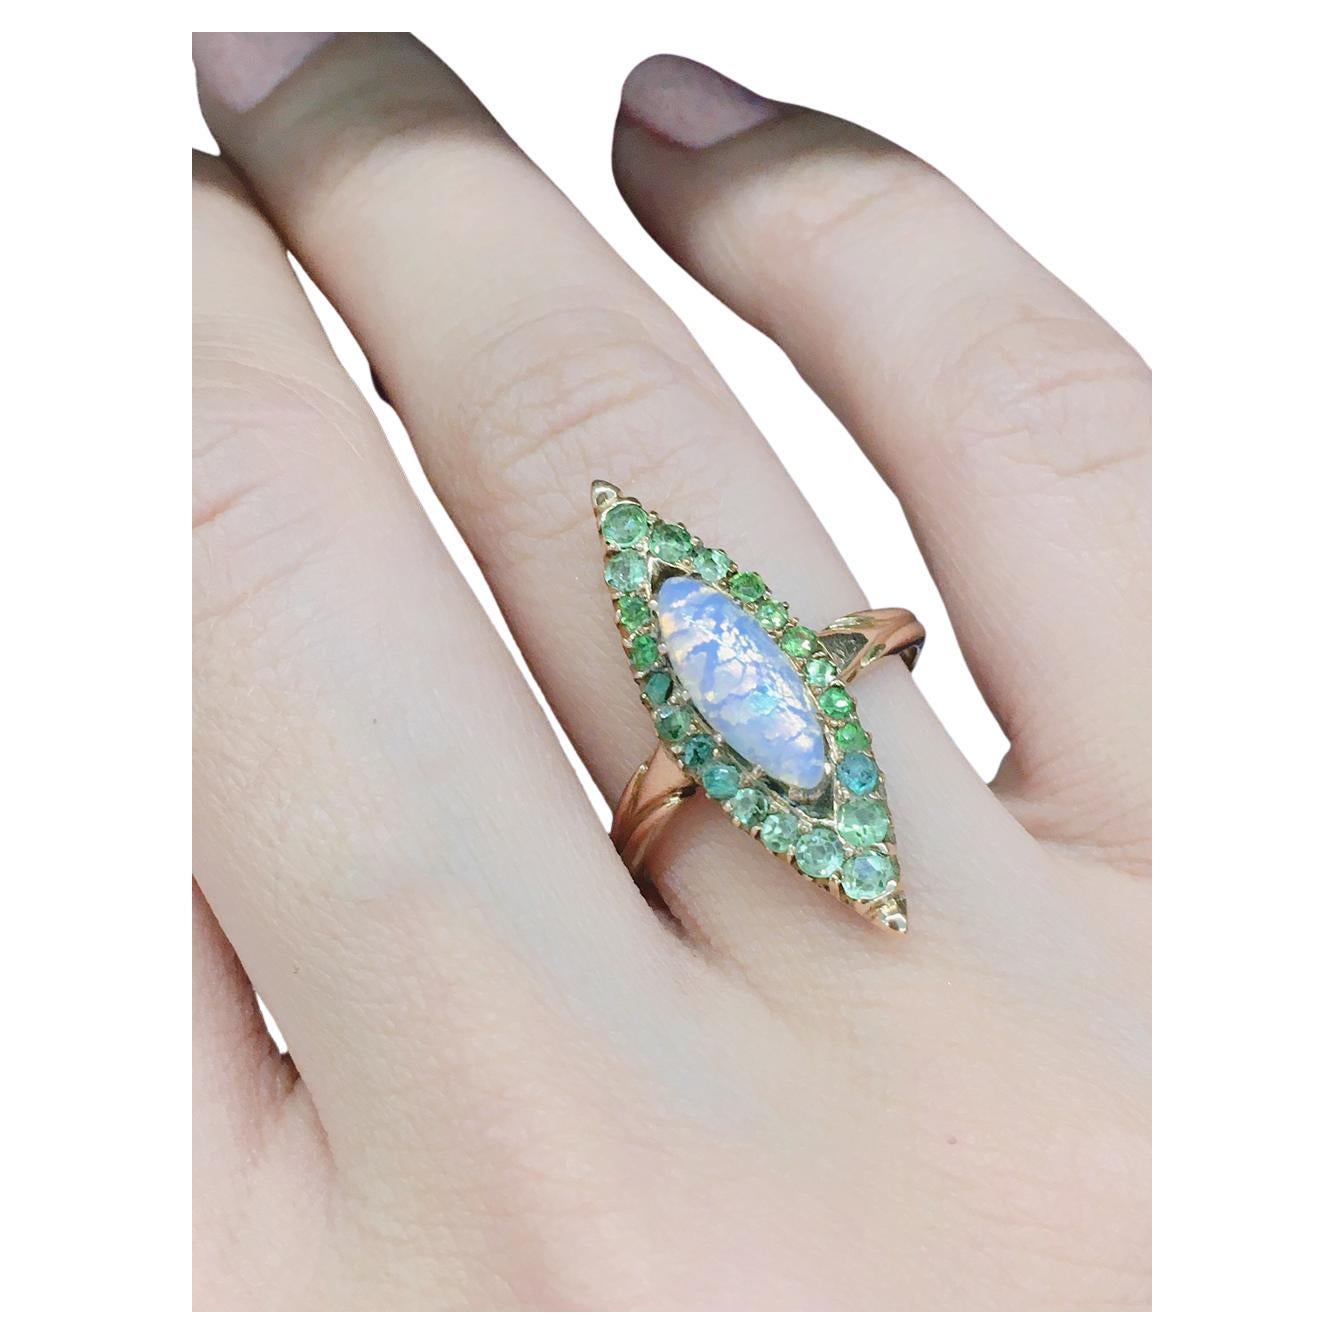 Antique russian ring in navviet style centered with a natural opal stone in marques cut flanked with green demantoid stones in 14k gold setting ring was made in st petersburg 1907/1910.c imperial russian era hall marked 56 imperial russian gold